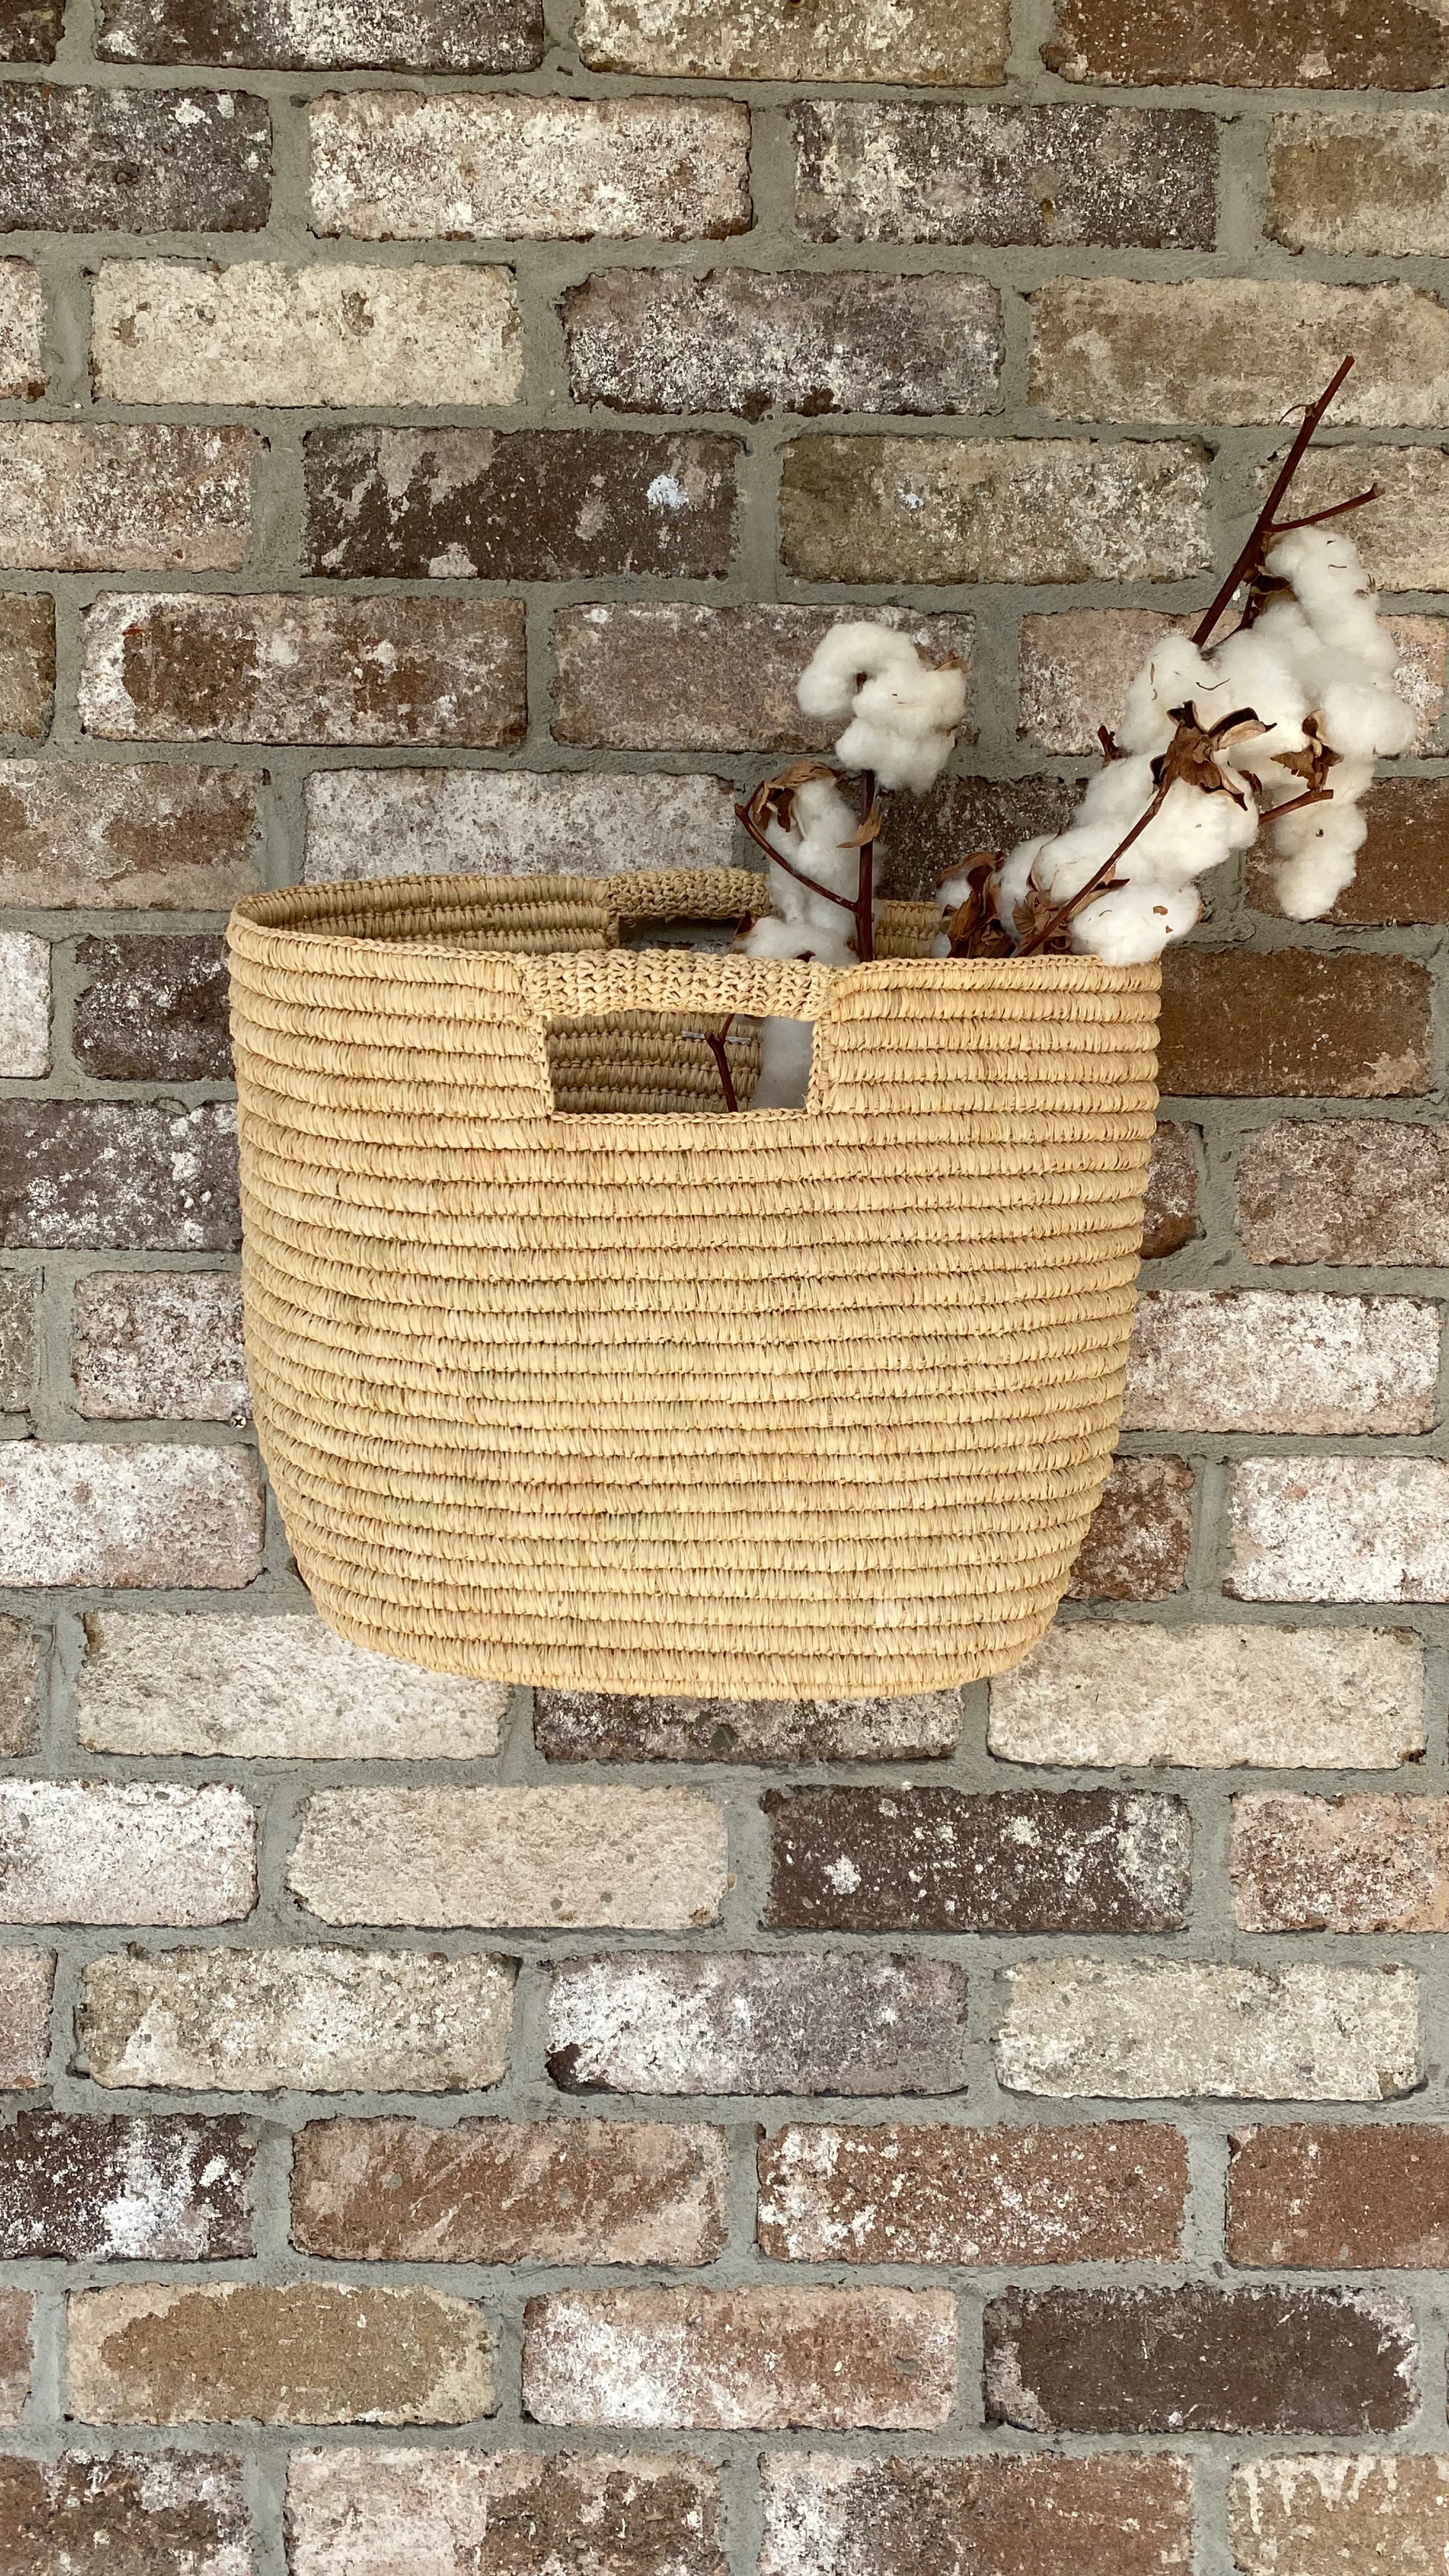 NEW Woven Bucket Basket freeshipping - White Amber the Label